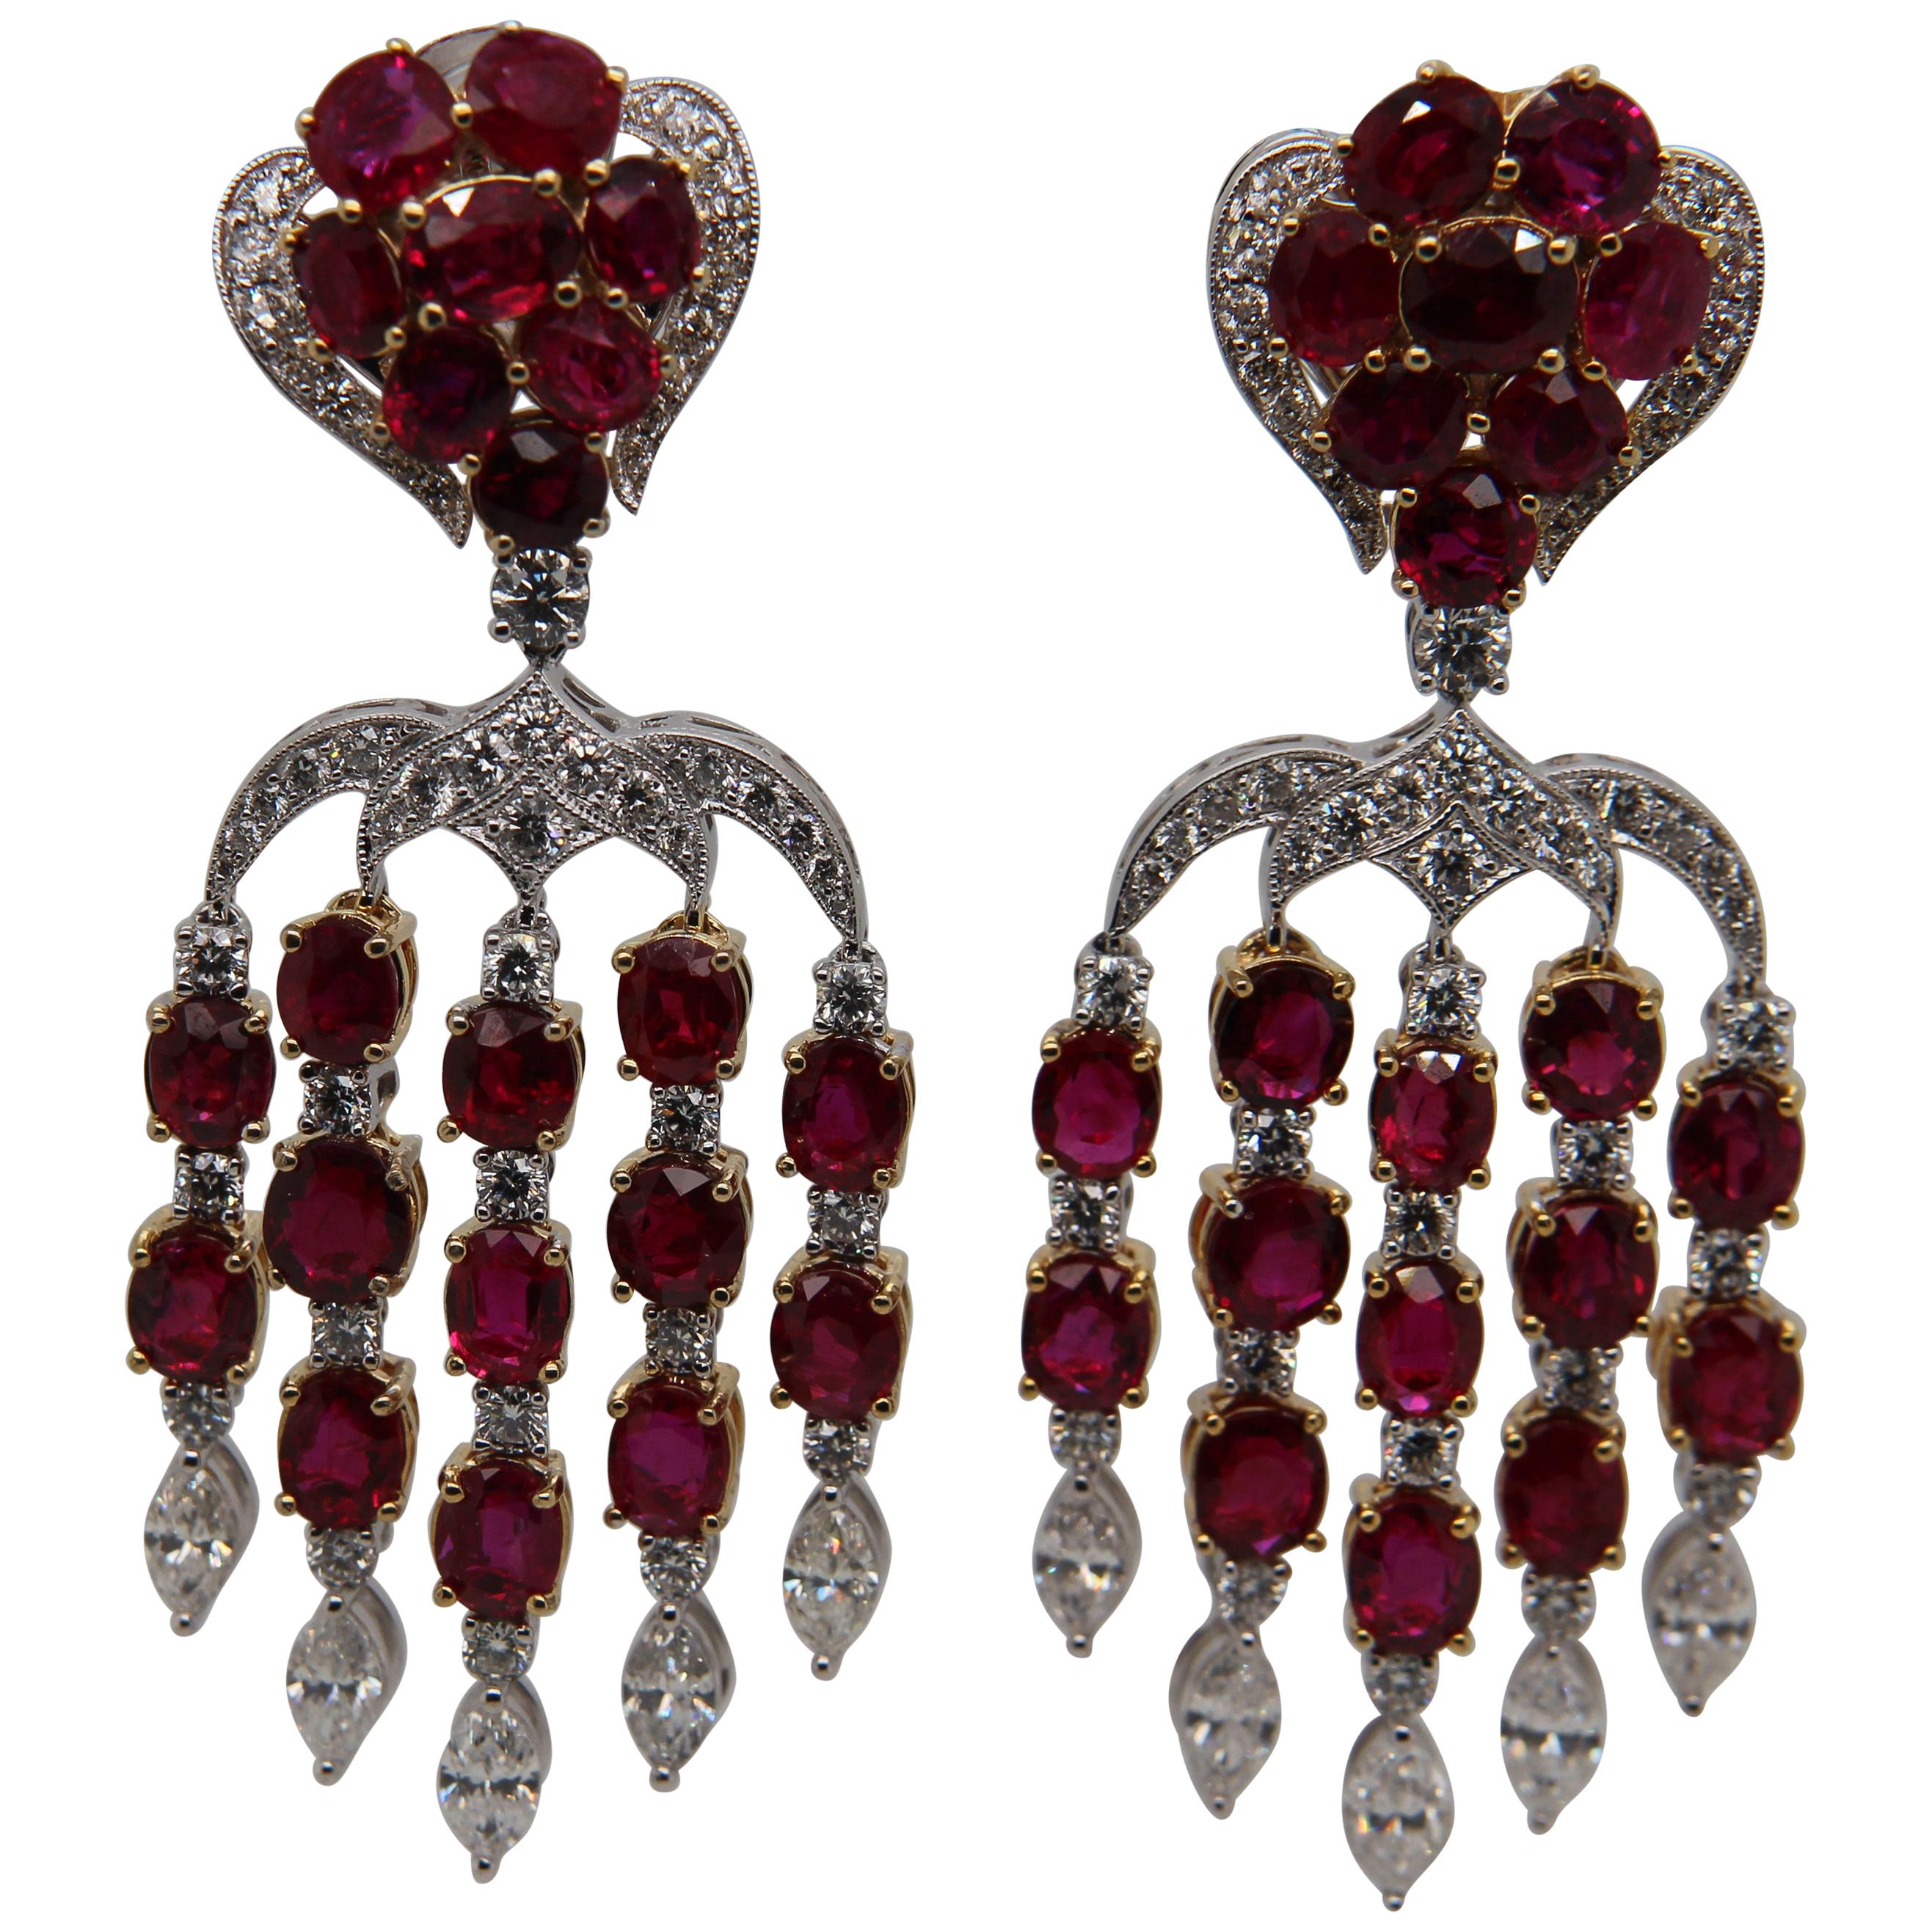 ICA Certified 15.28 Carat Burmese Unheated Ruby and Diamond Earring in 18K Gold